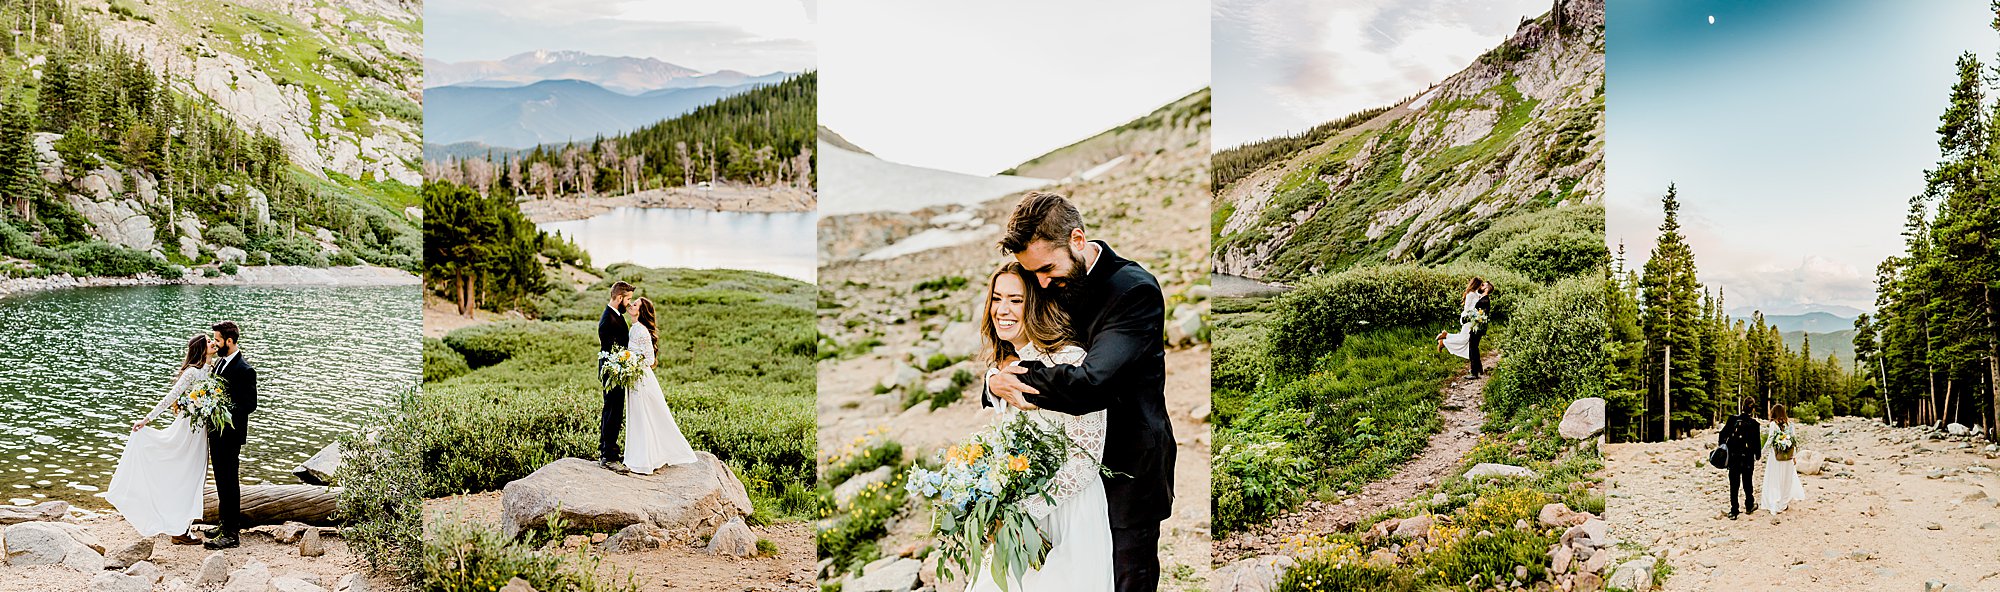 bride and groom celebrate their colorado adventure elopement in the gorgeous mountains in front of an alpine lake and glacier